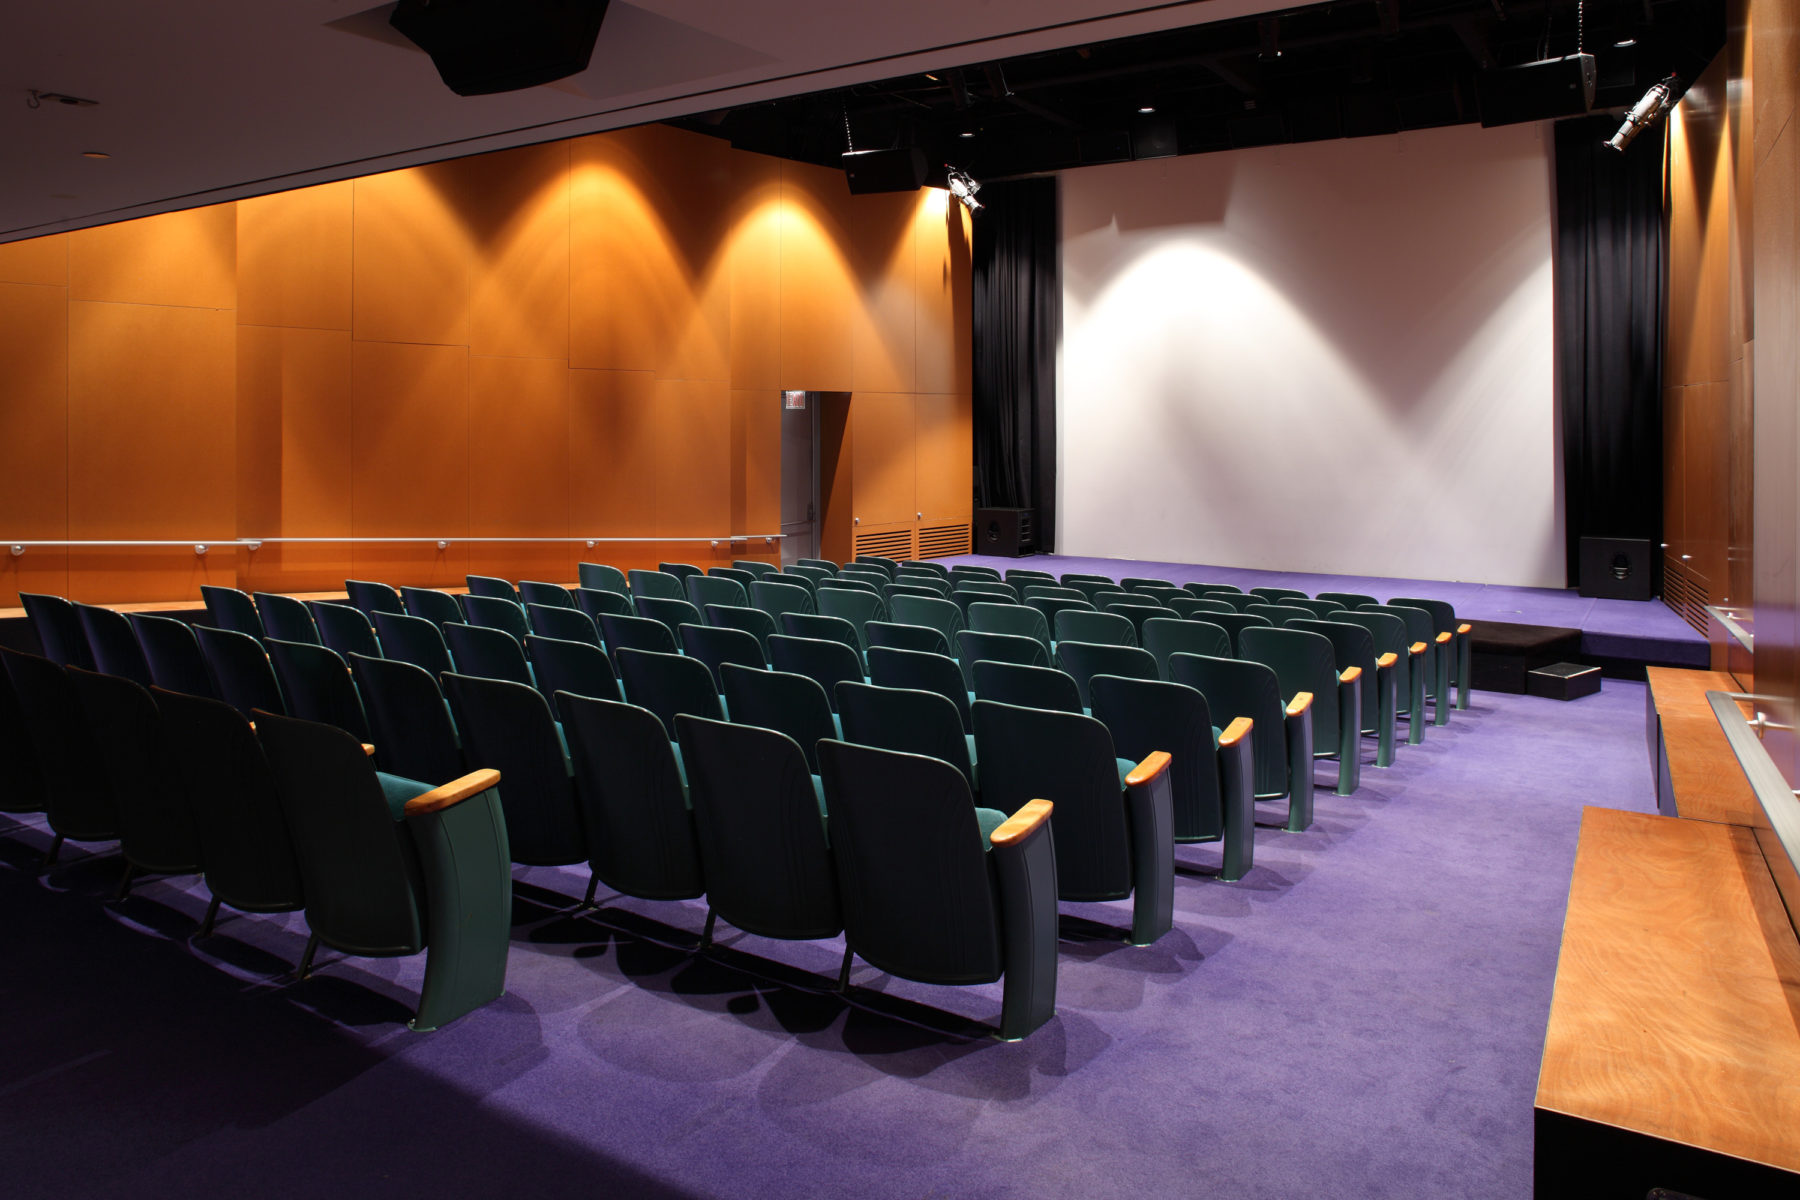 A photograph of the Andy Warhol Museum theater. Rows of green theater seats slope towards a large screen flanked with black curtains. The carpet is purple, and the walls are orange.